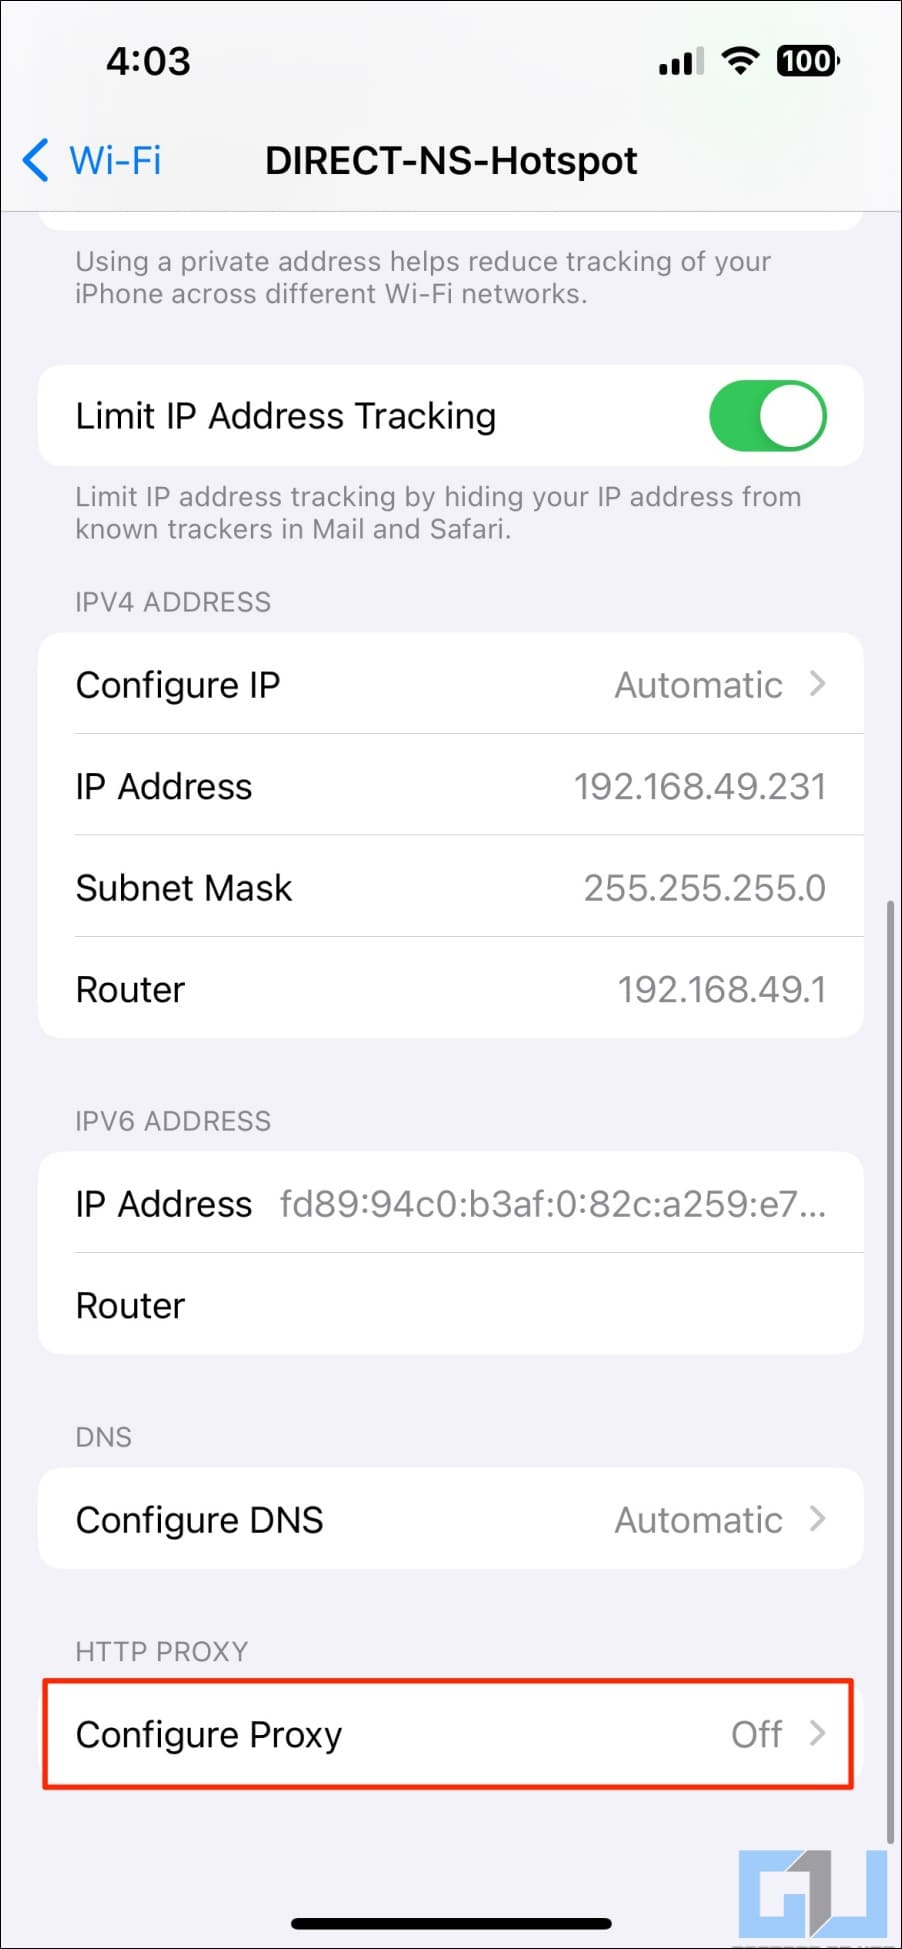 Scroll down and tap Configure Proxy